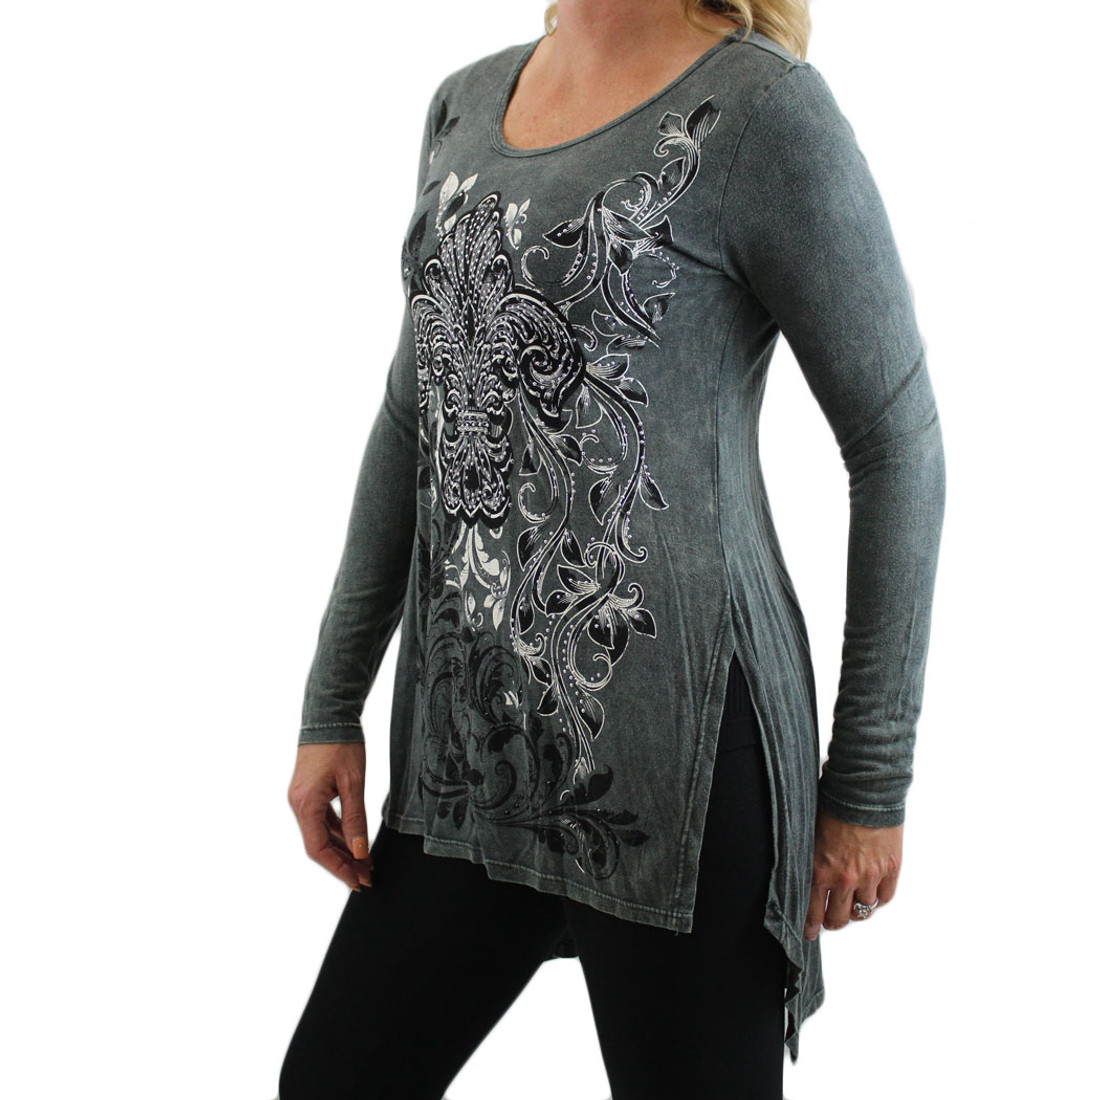 Women's Vocal Mineral Wash Tunic Top with Floral Design